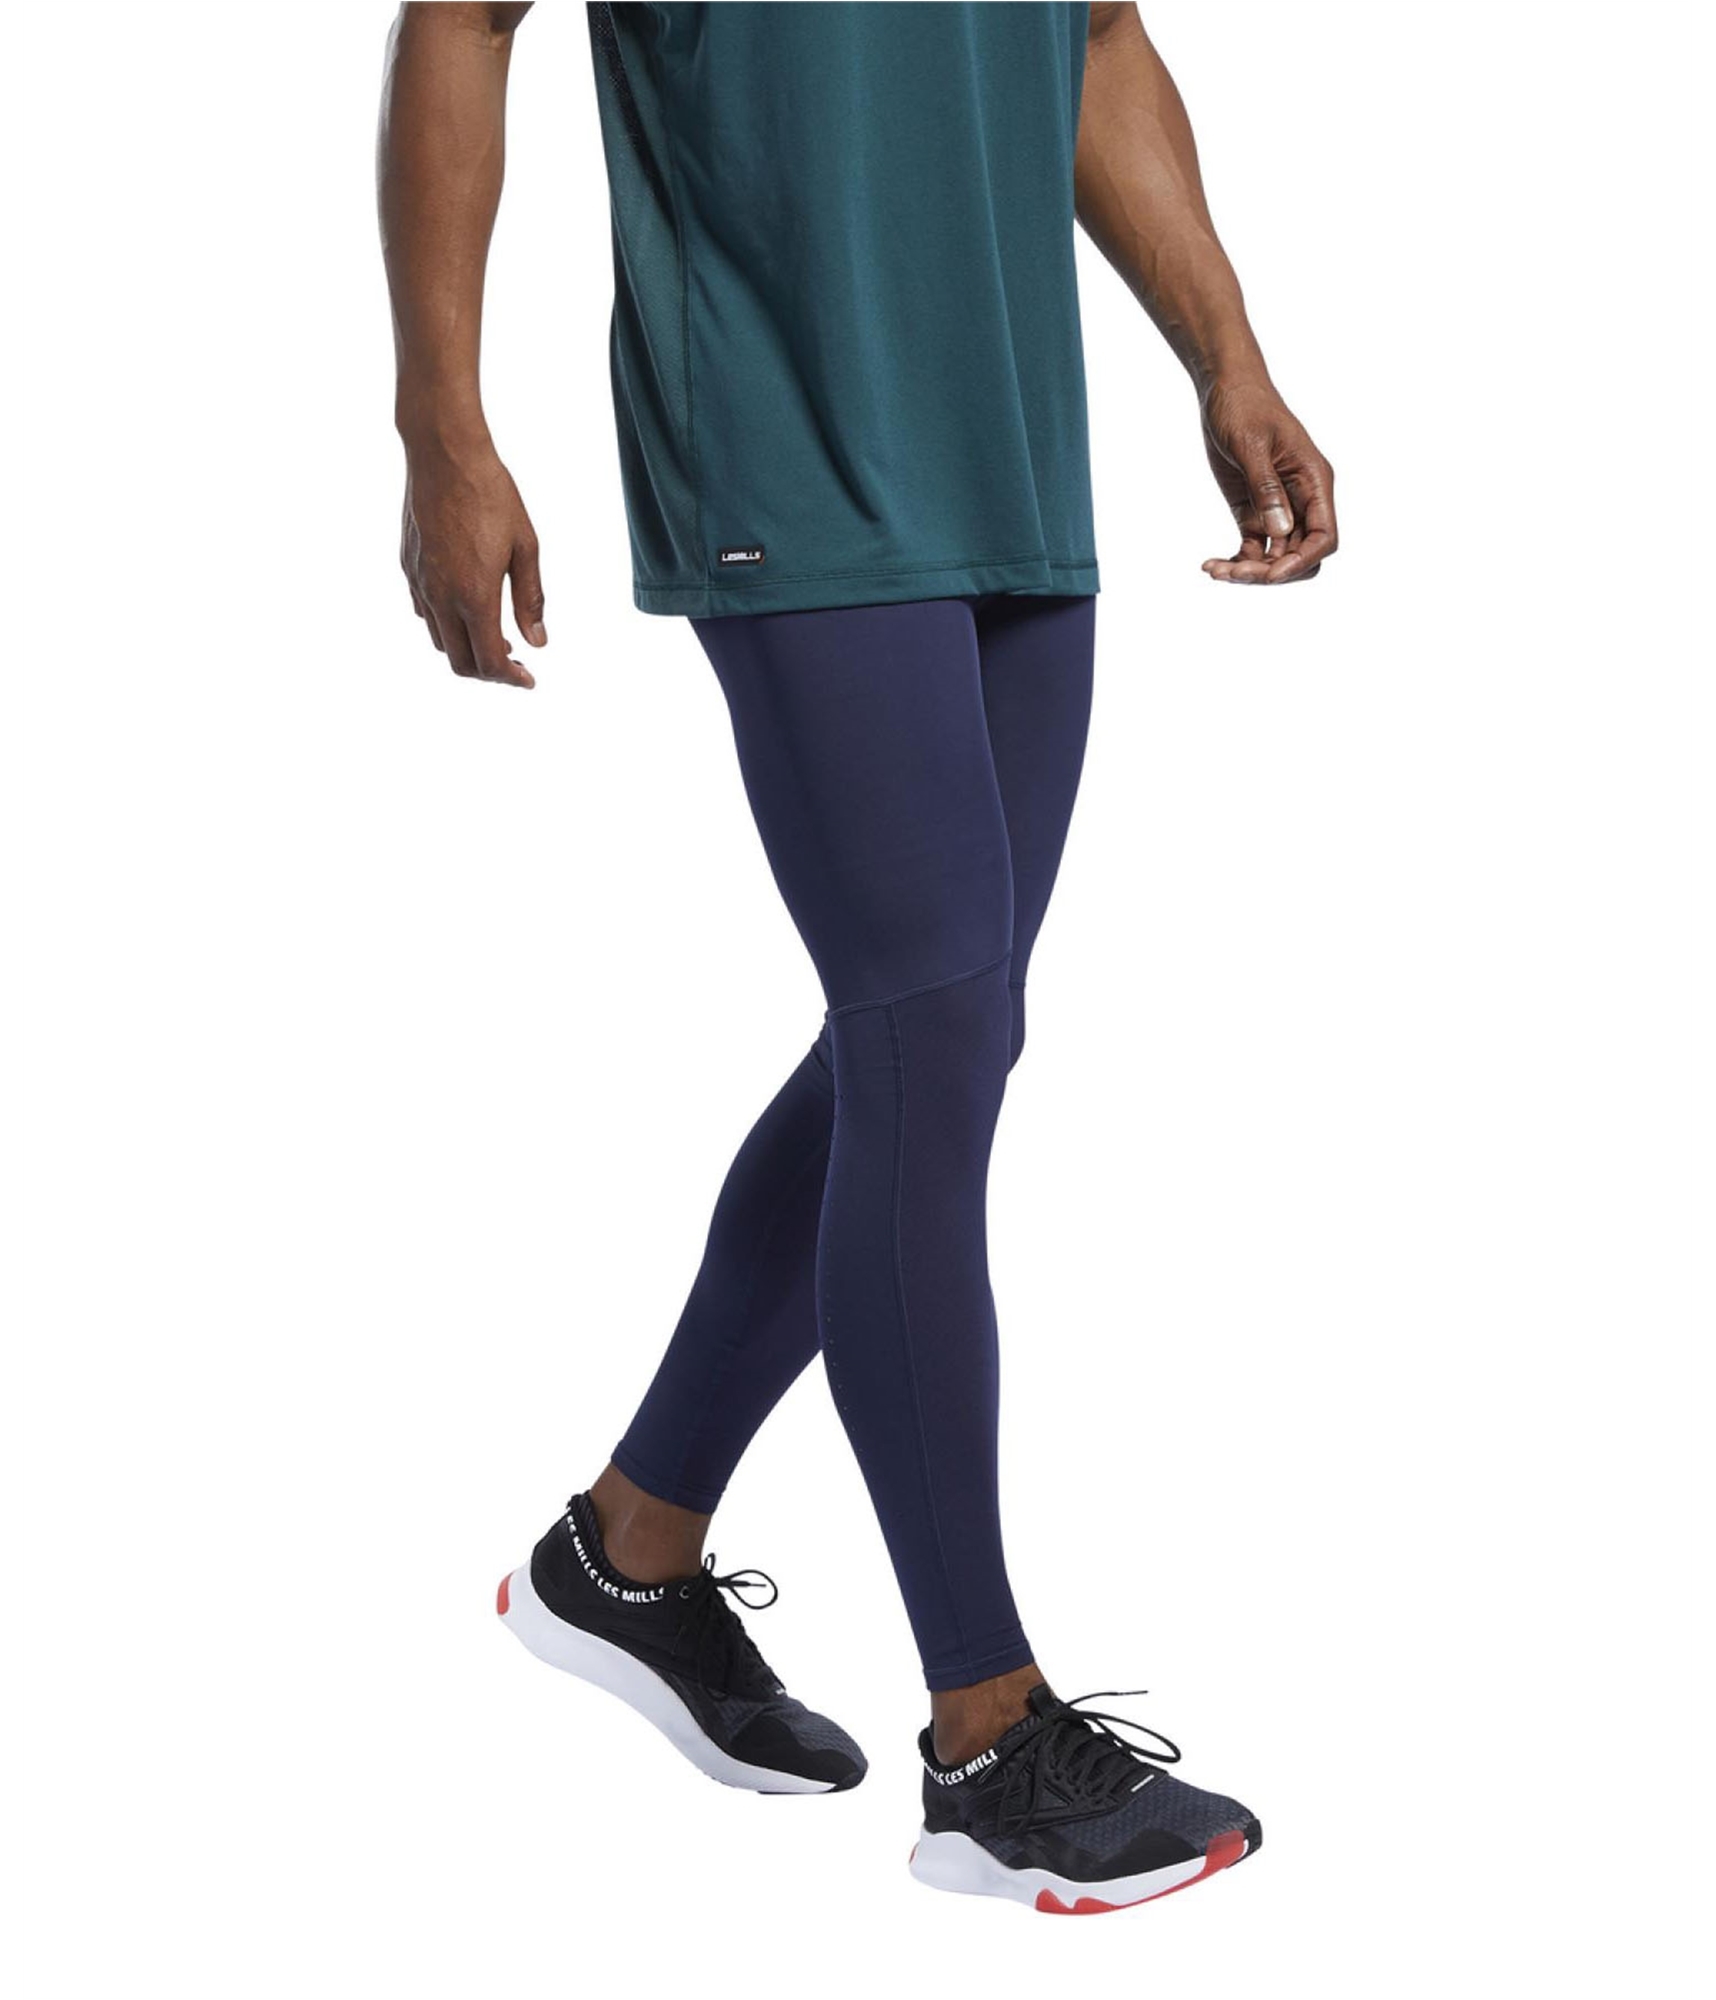 Buy a Reebok Mills Compression Athletic Online | TagsWeekly.com